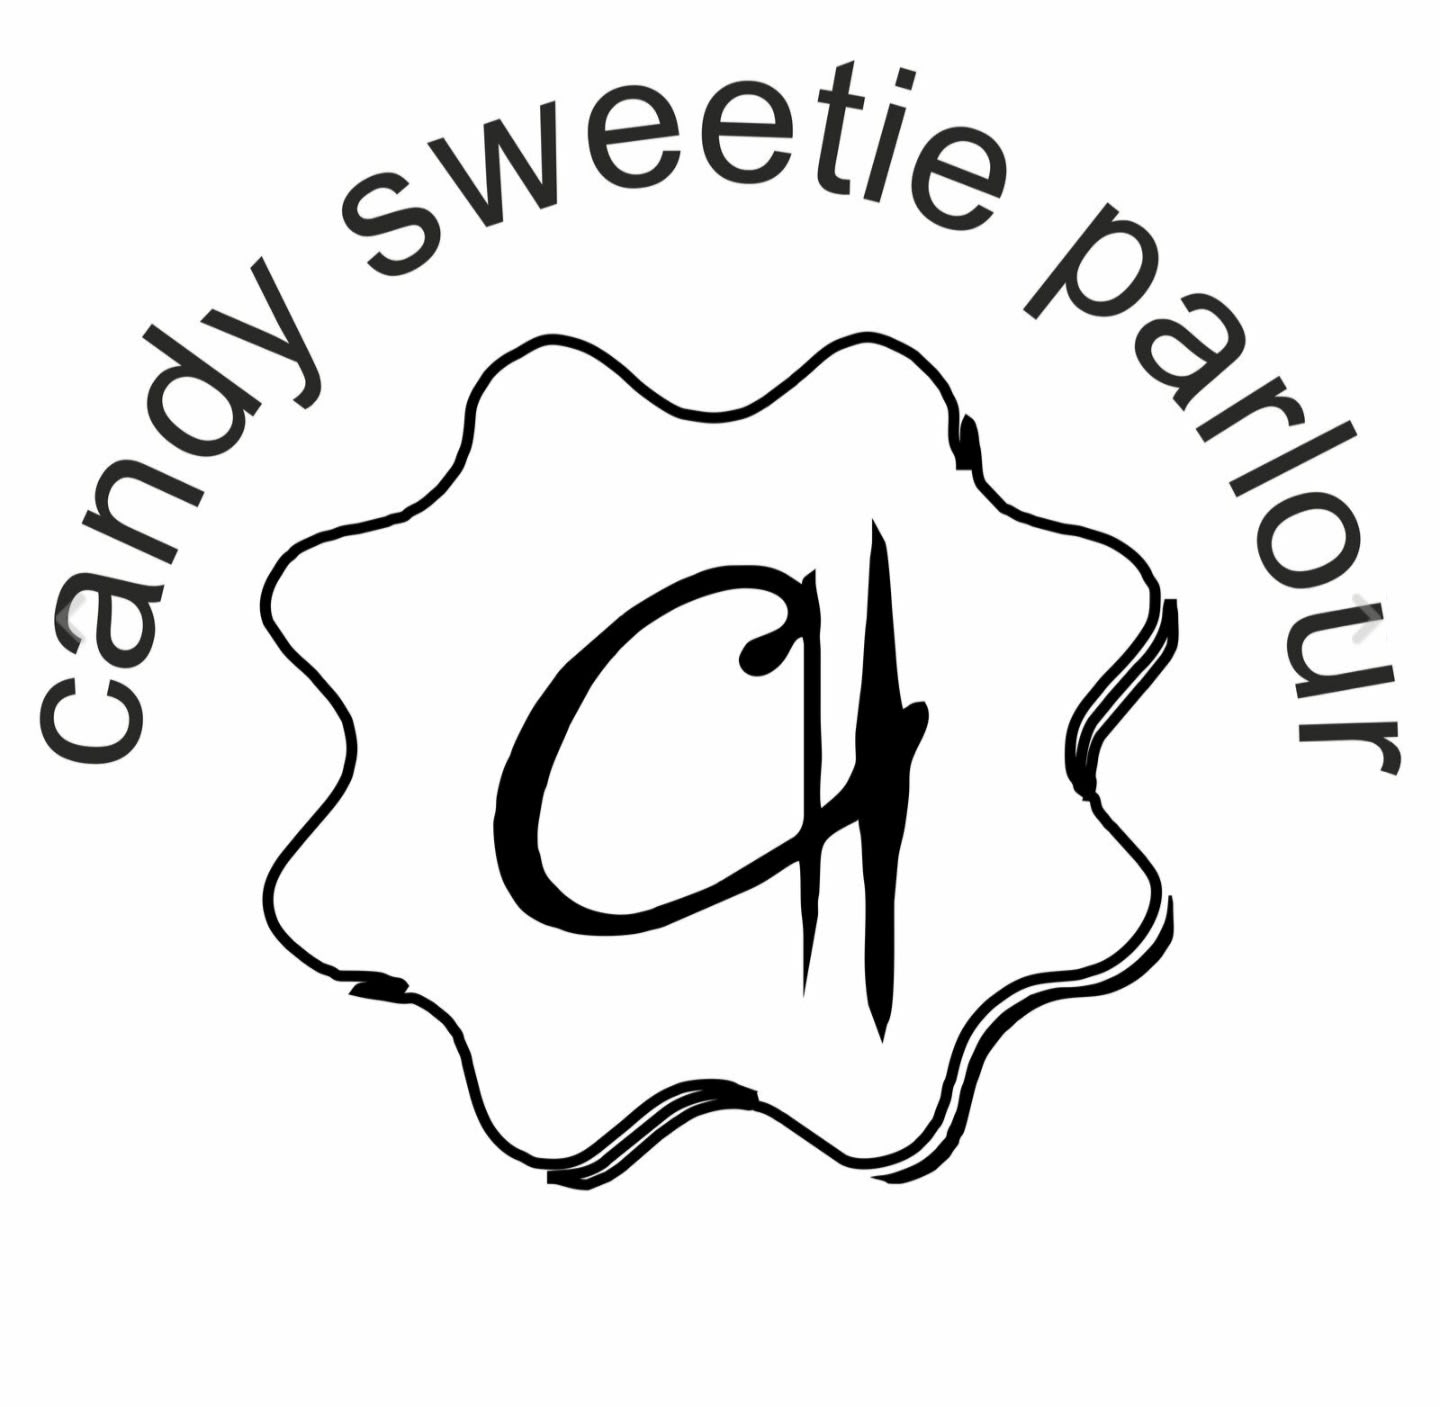 Candy Sweetie Parlour